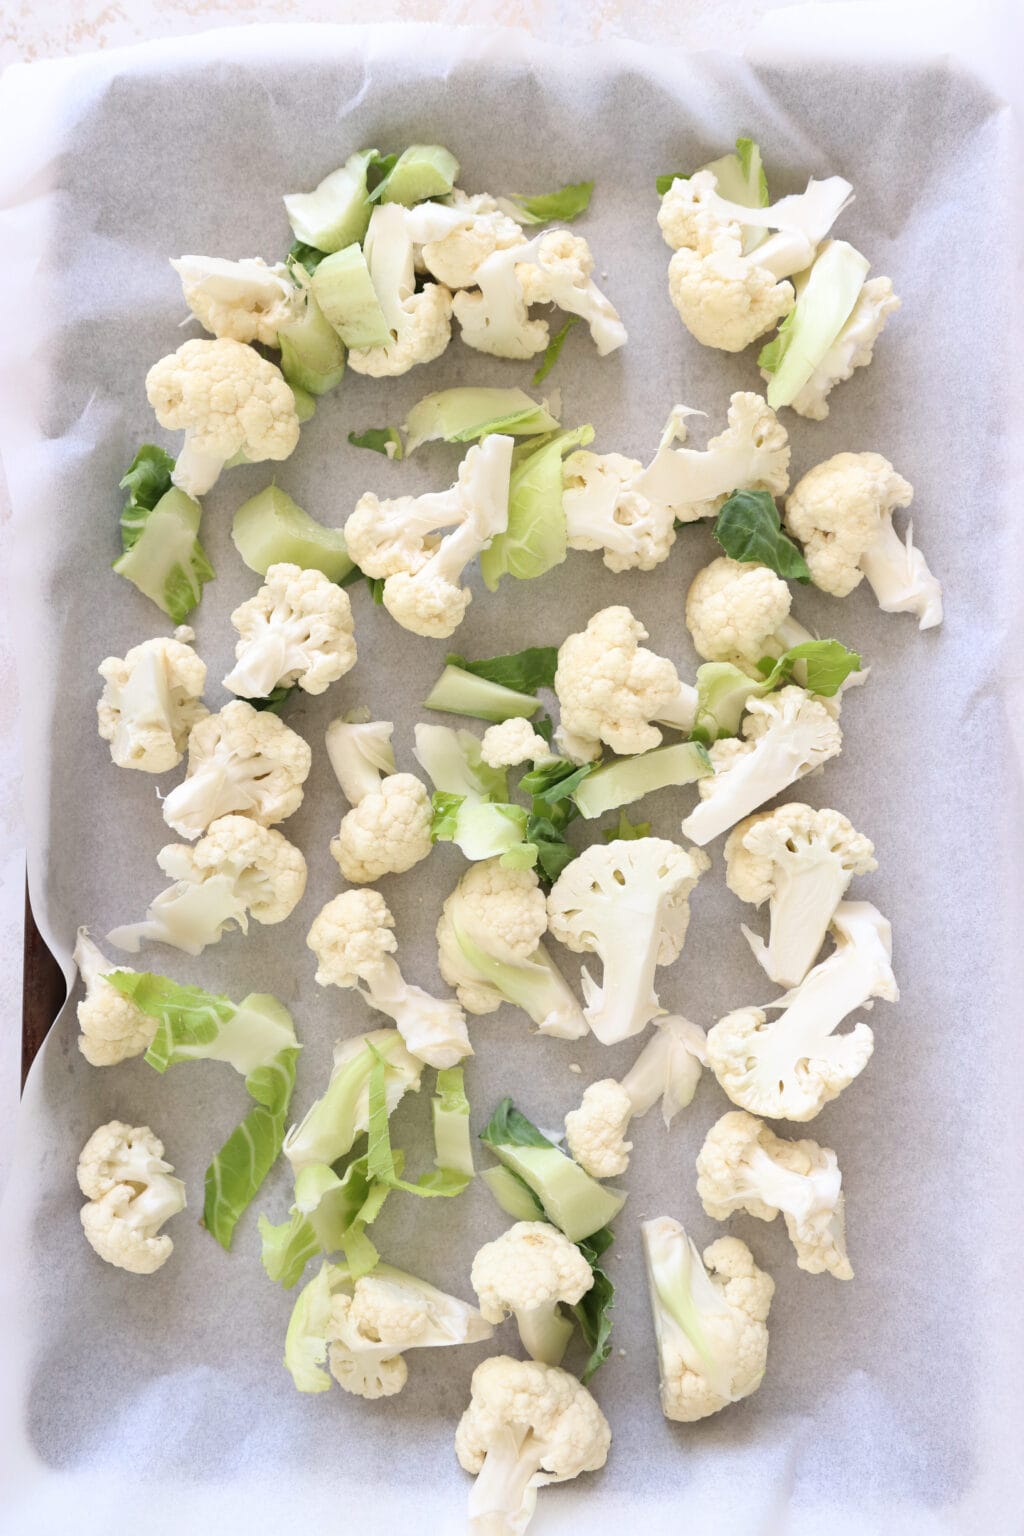 Cauliflower florets cut into pieces and laid out on a baking sheet which is lined with parchment paper